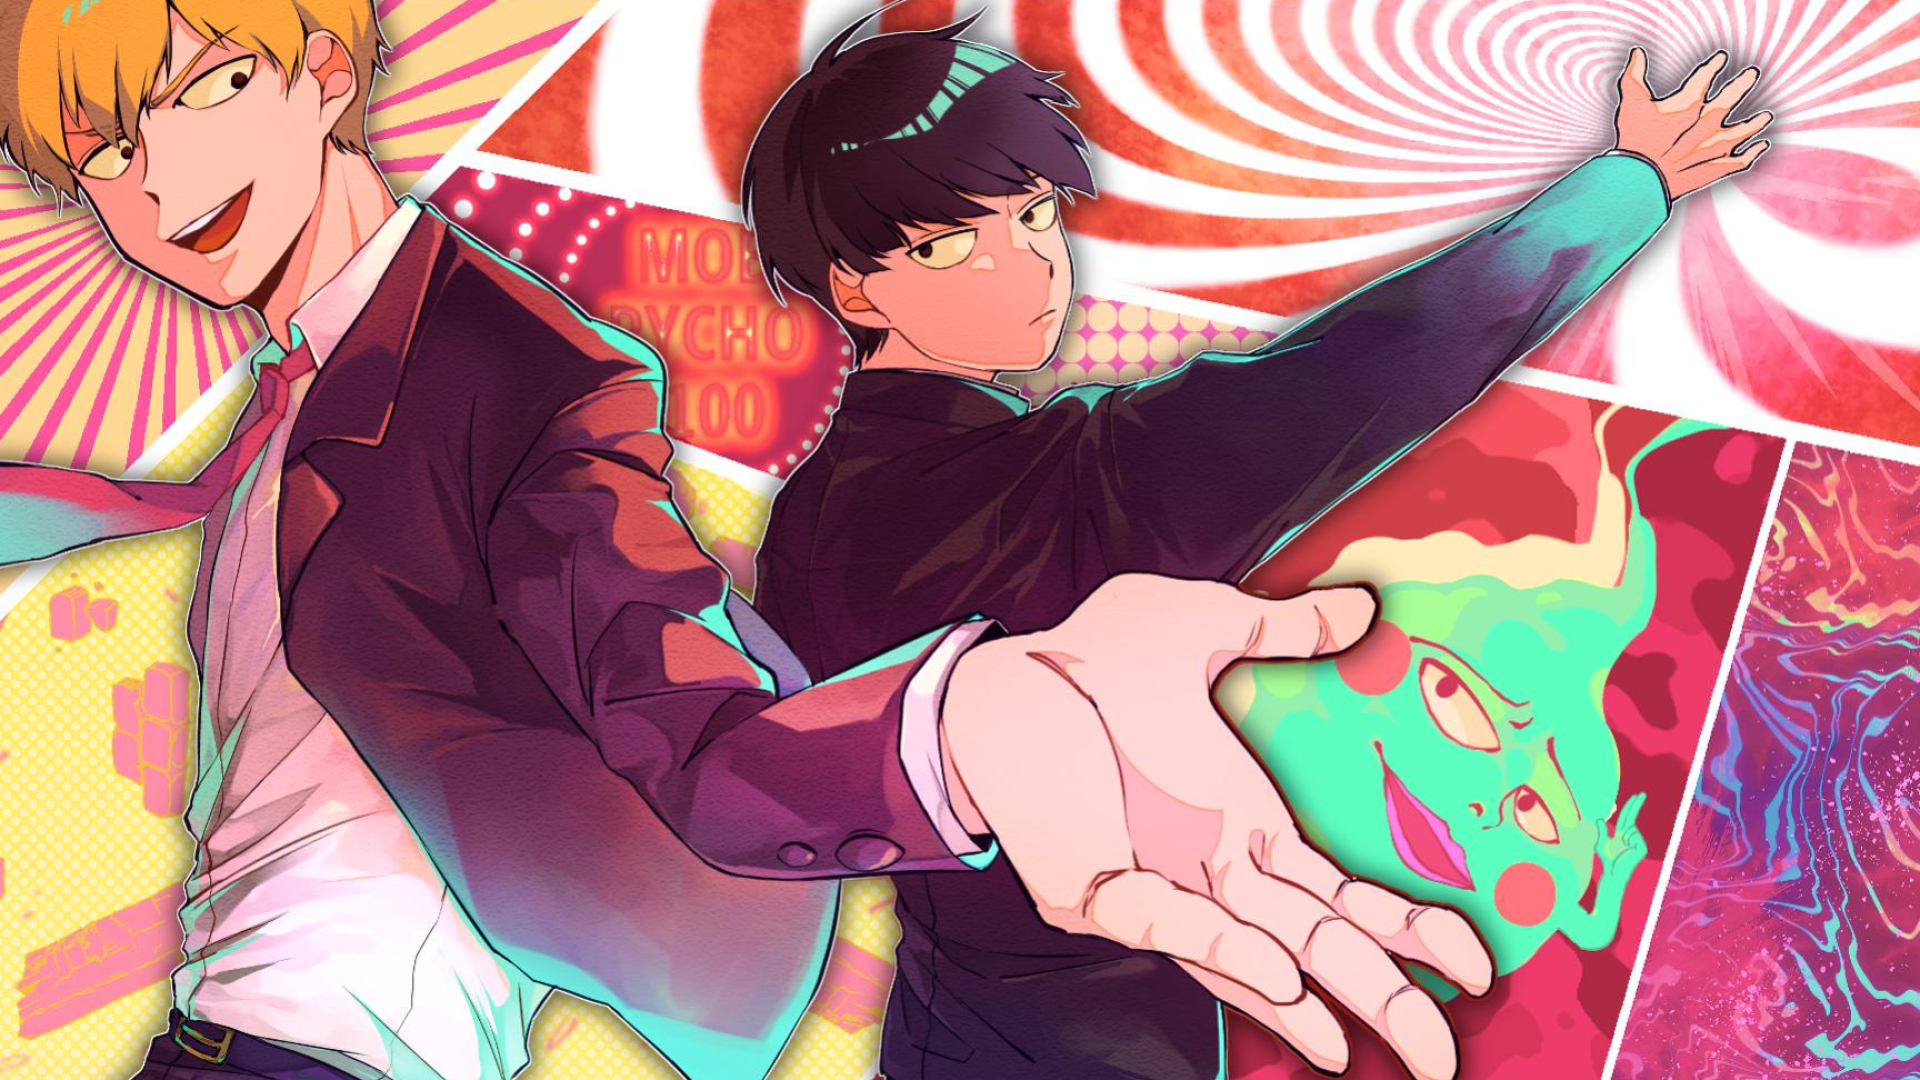 1920x1080 Mob Psycho 100 /w/ Anime/Wallpapers